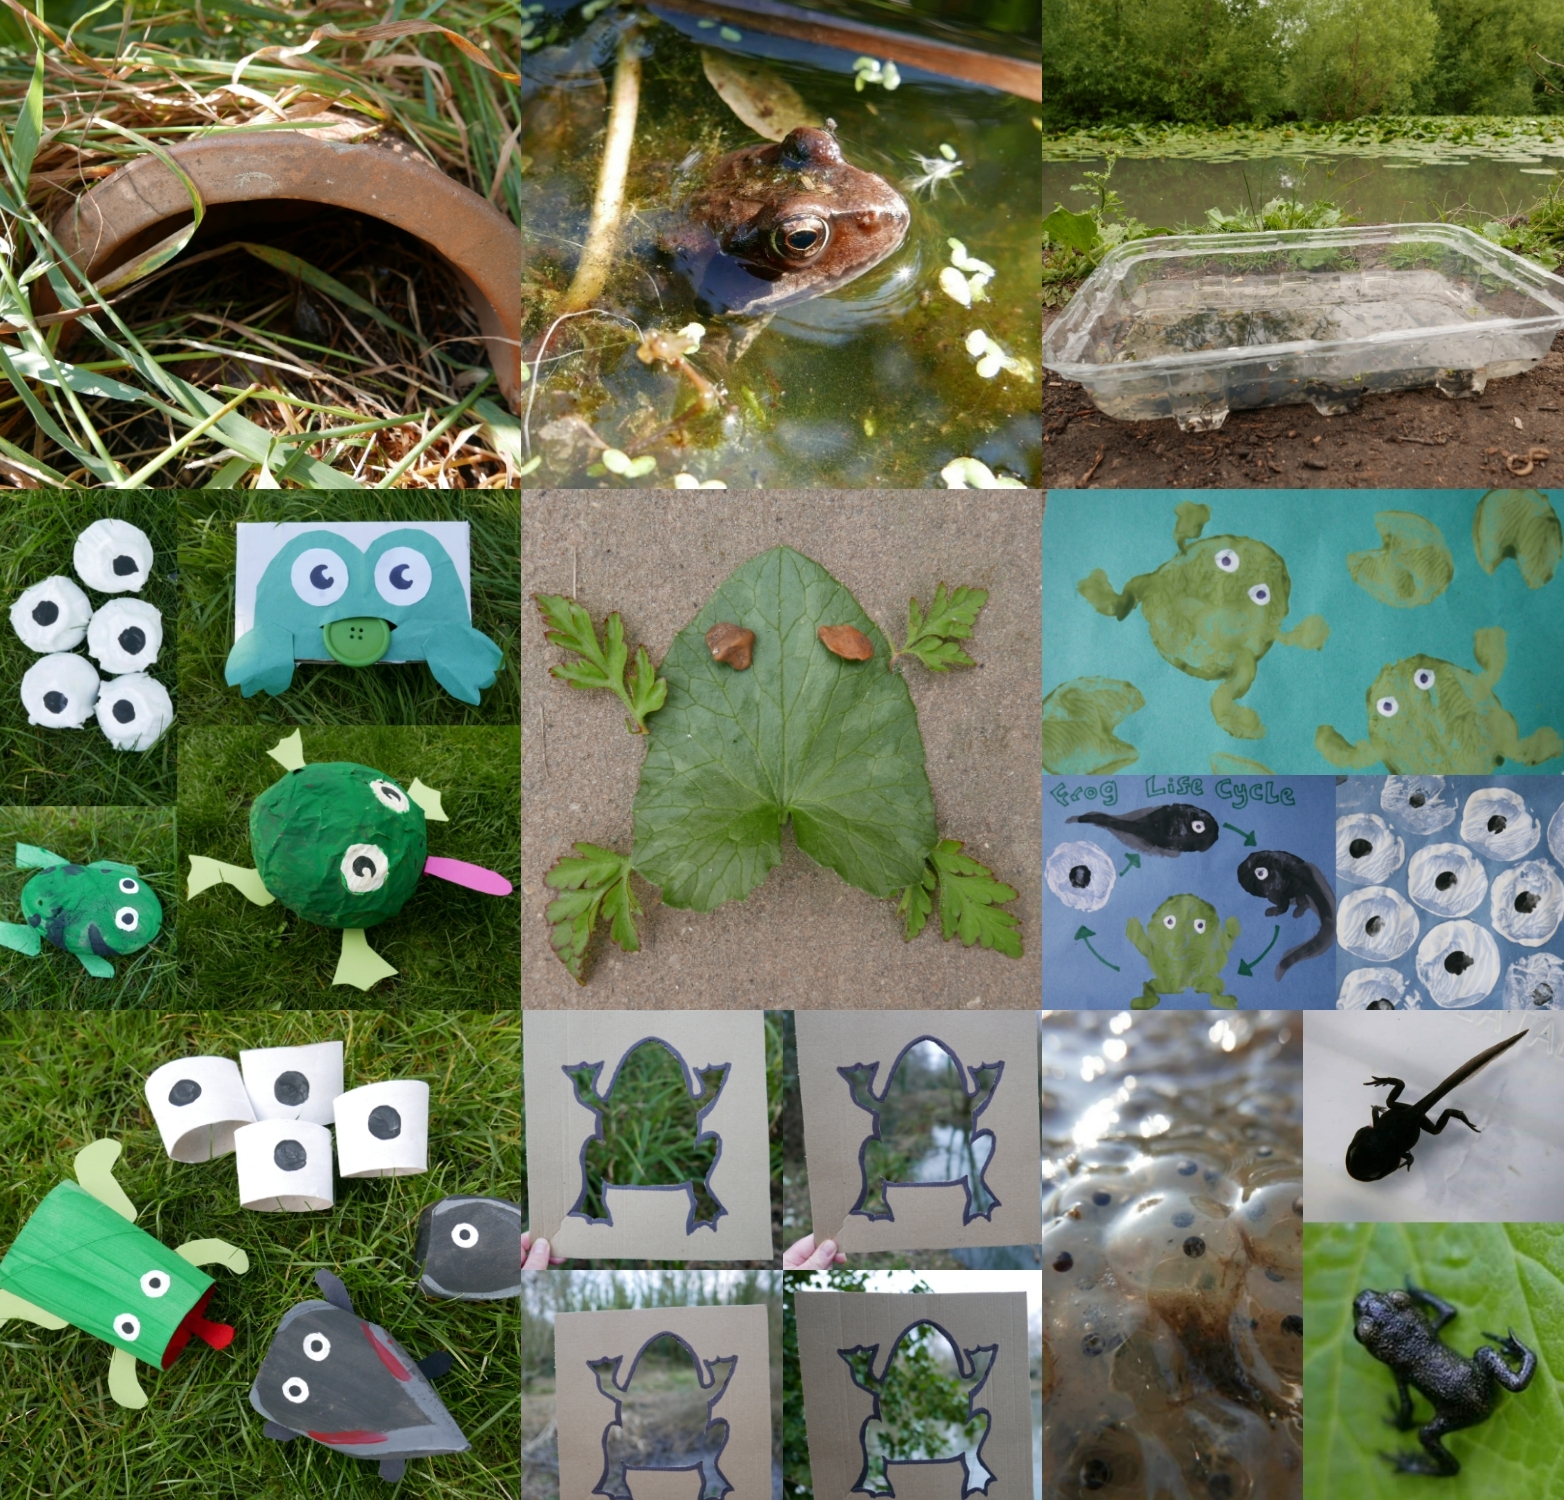 16 Frog activity ideas + fun facts – Childsplayabc ~ Nature is our  playground